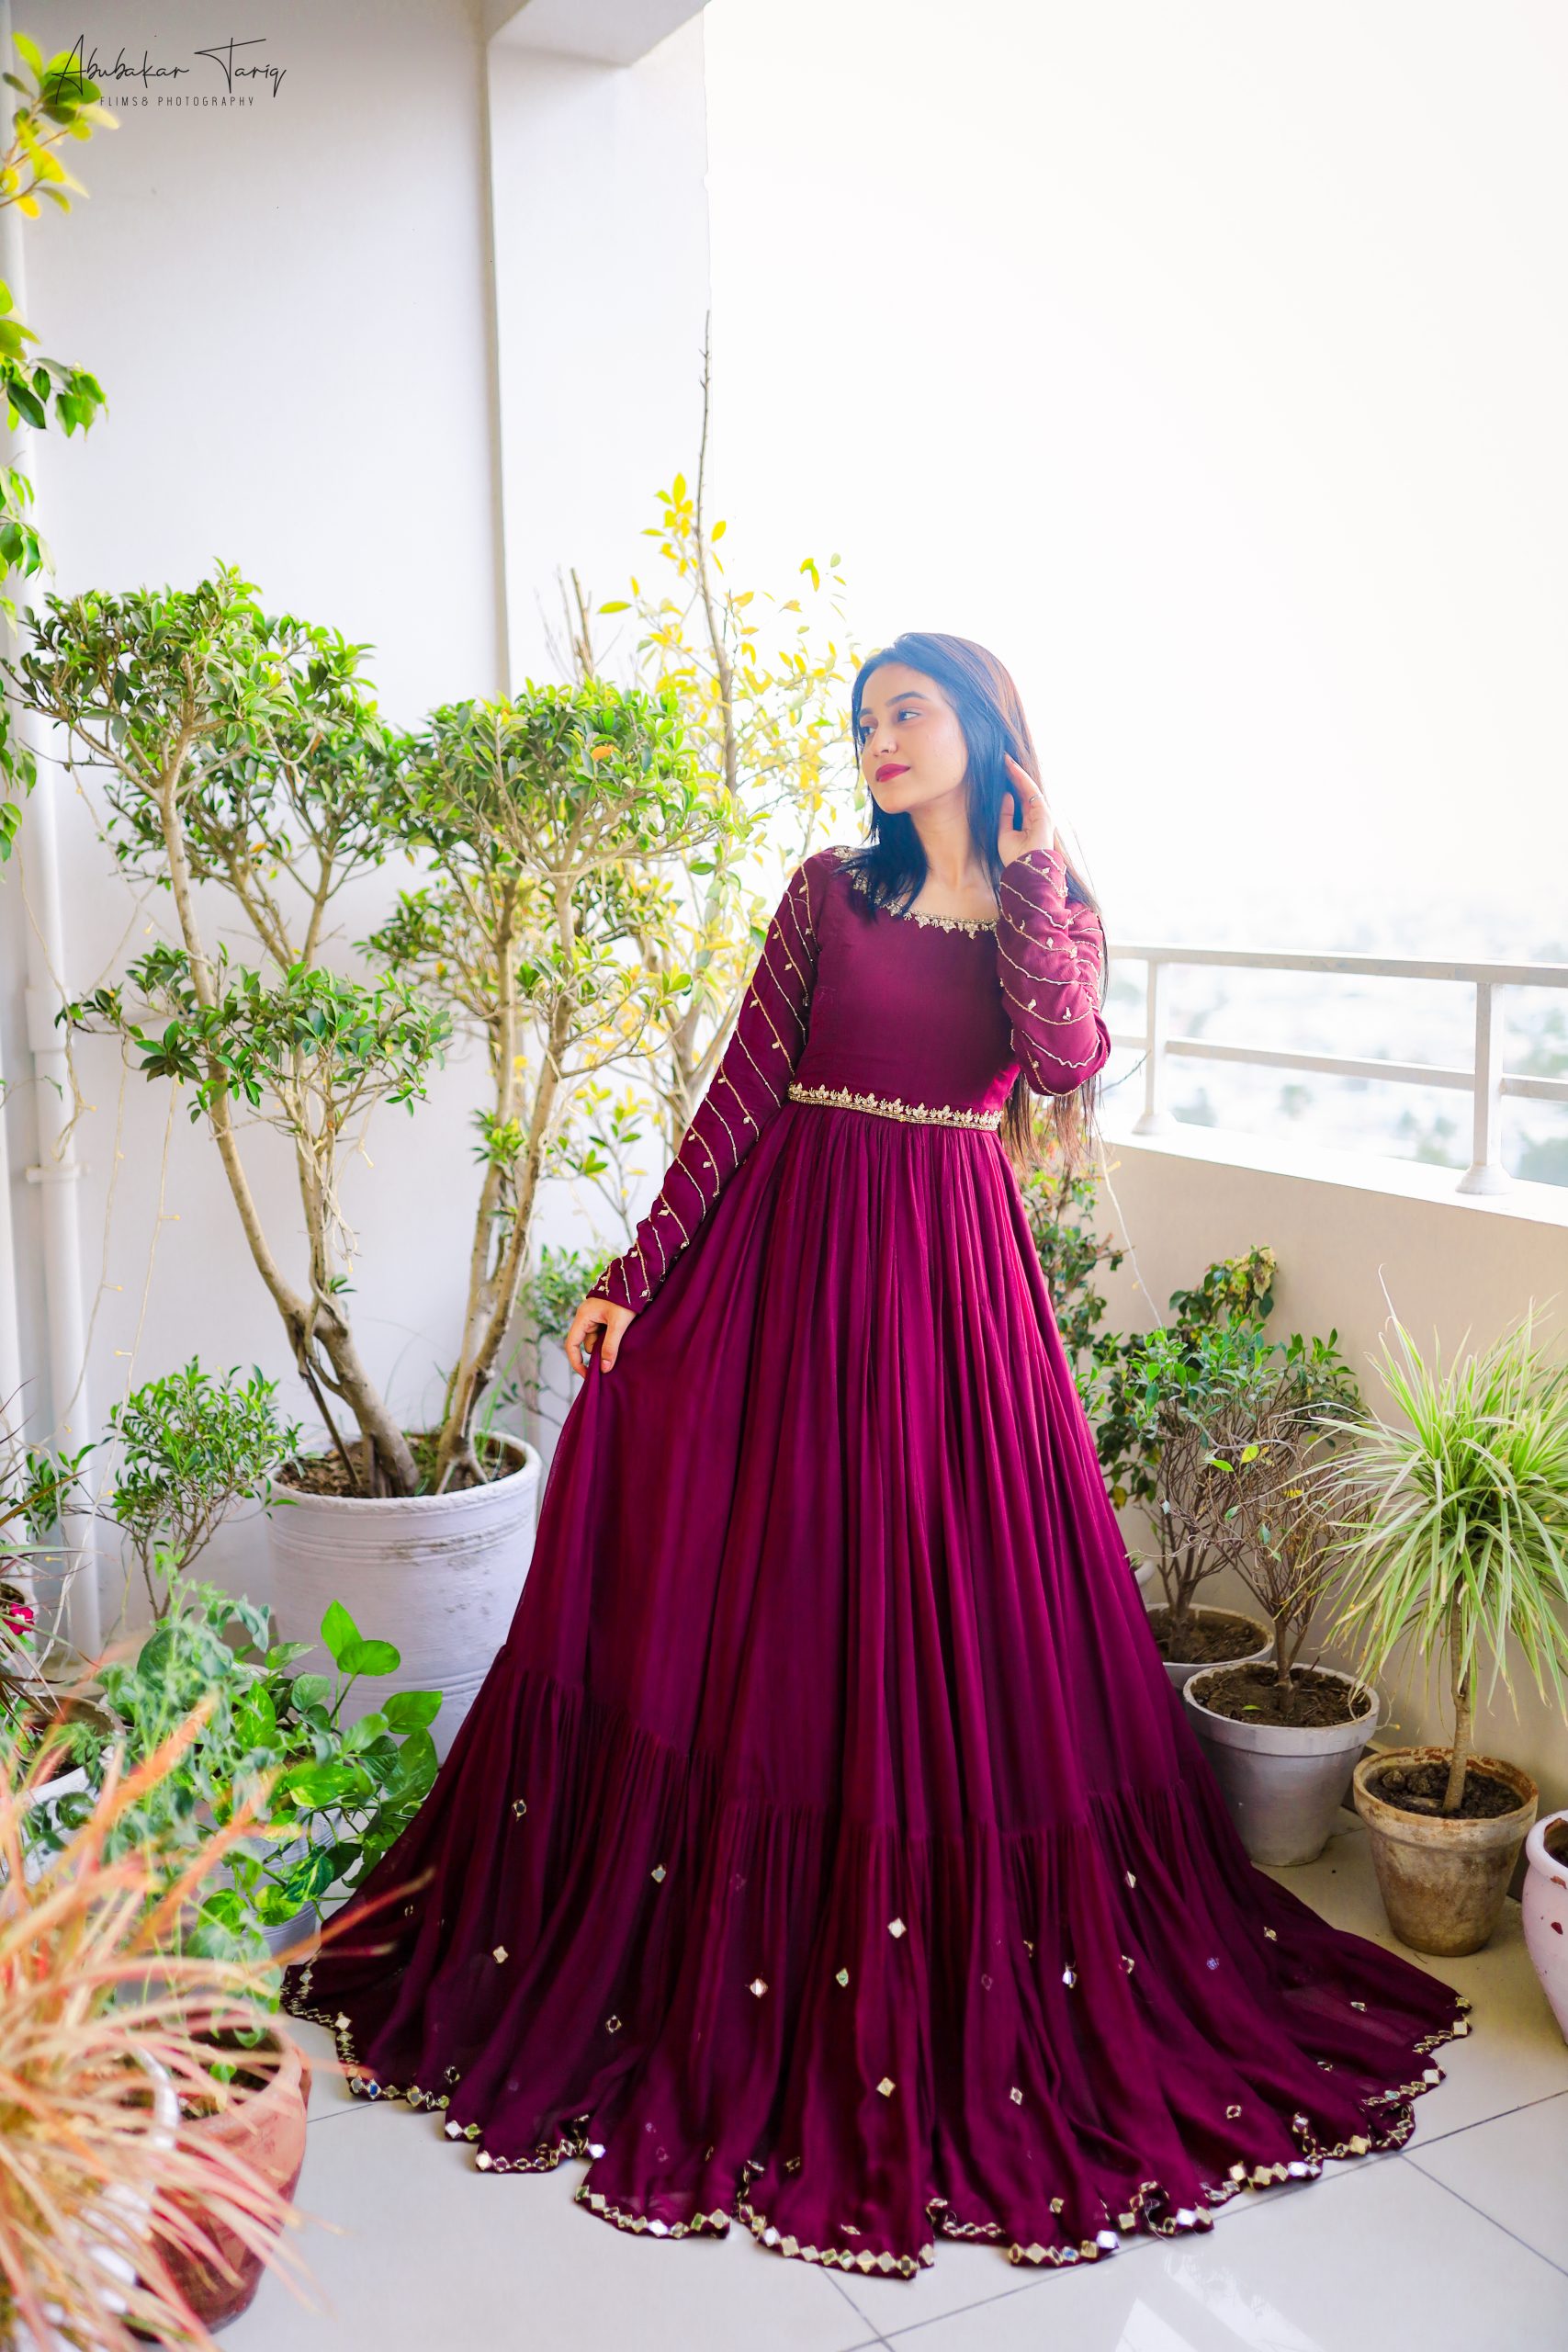 Silk traditional Long gown in marroom and purple color for Mom n Daugh –  siyarasfashionhouse